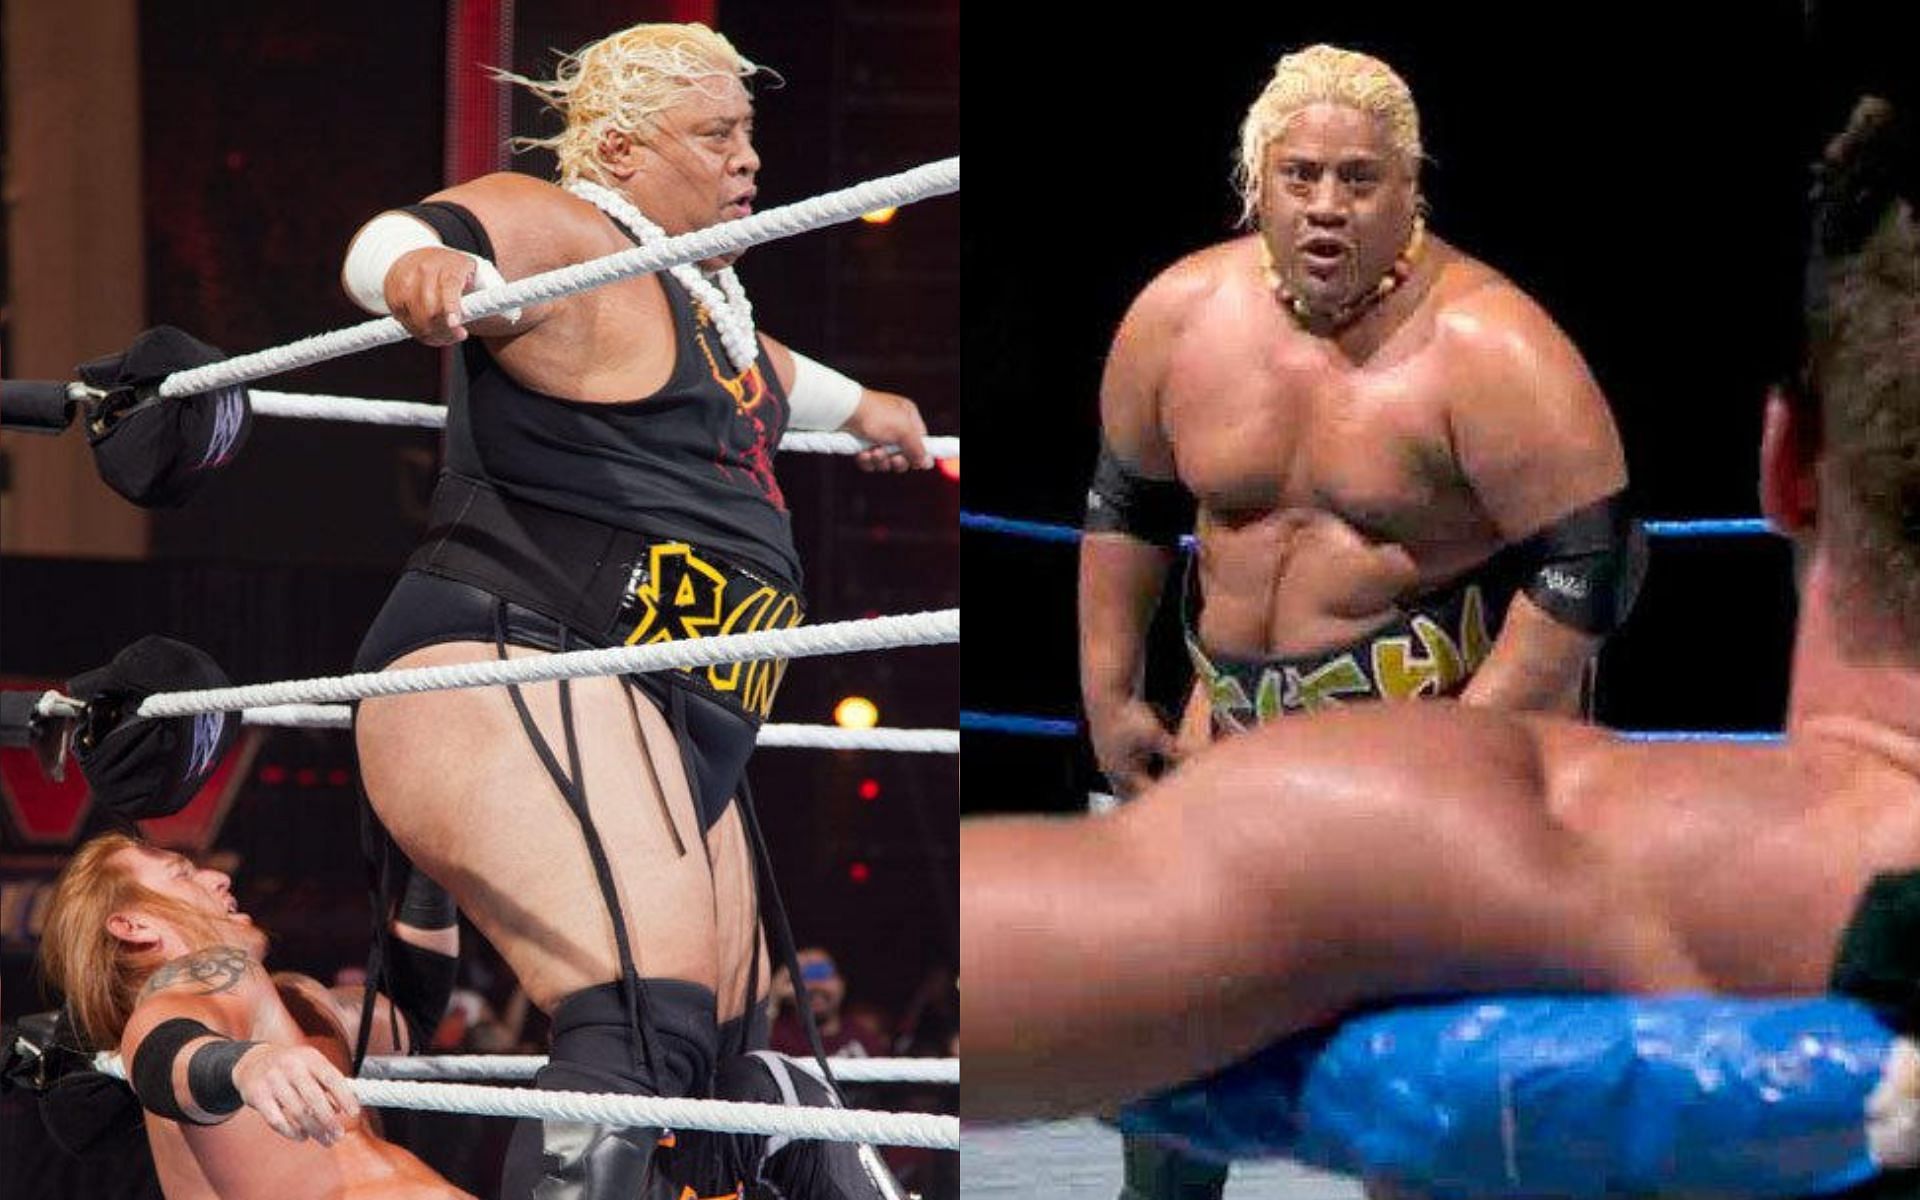 Rikishi chose to listen to a fan and created one of the most memorable WWE moves of all time